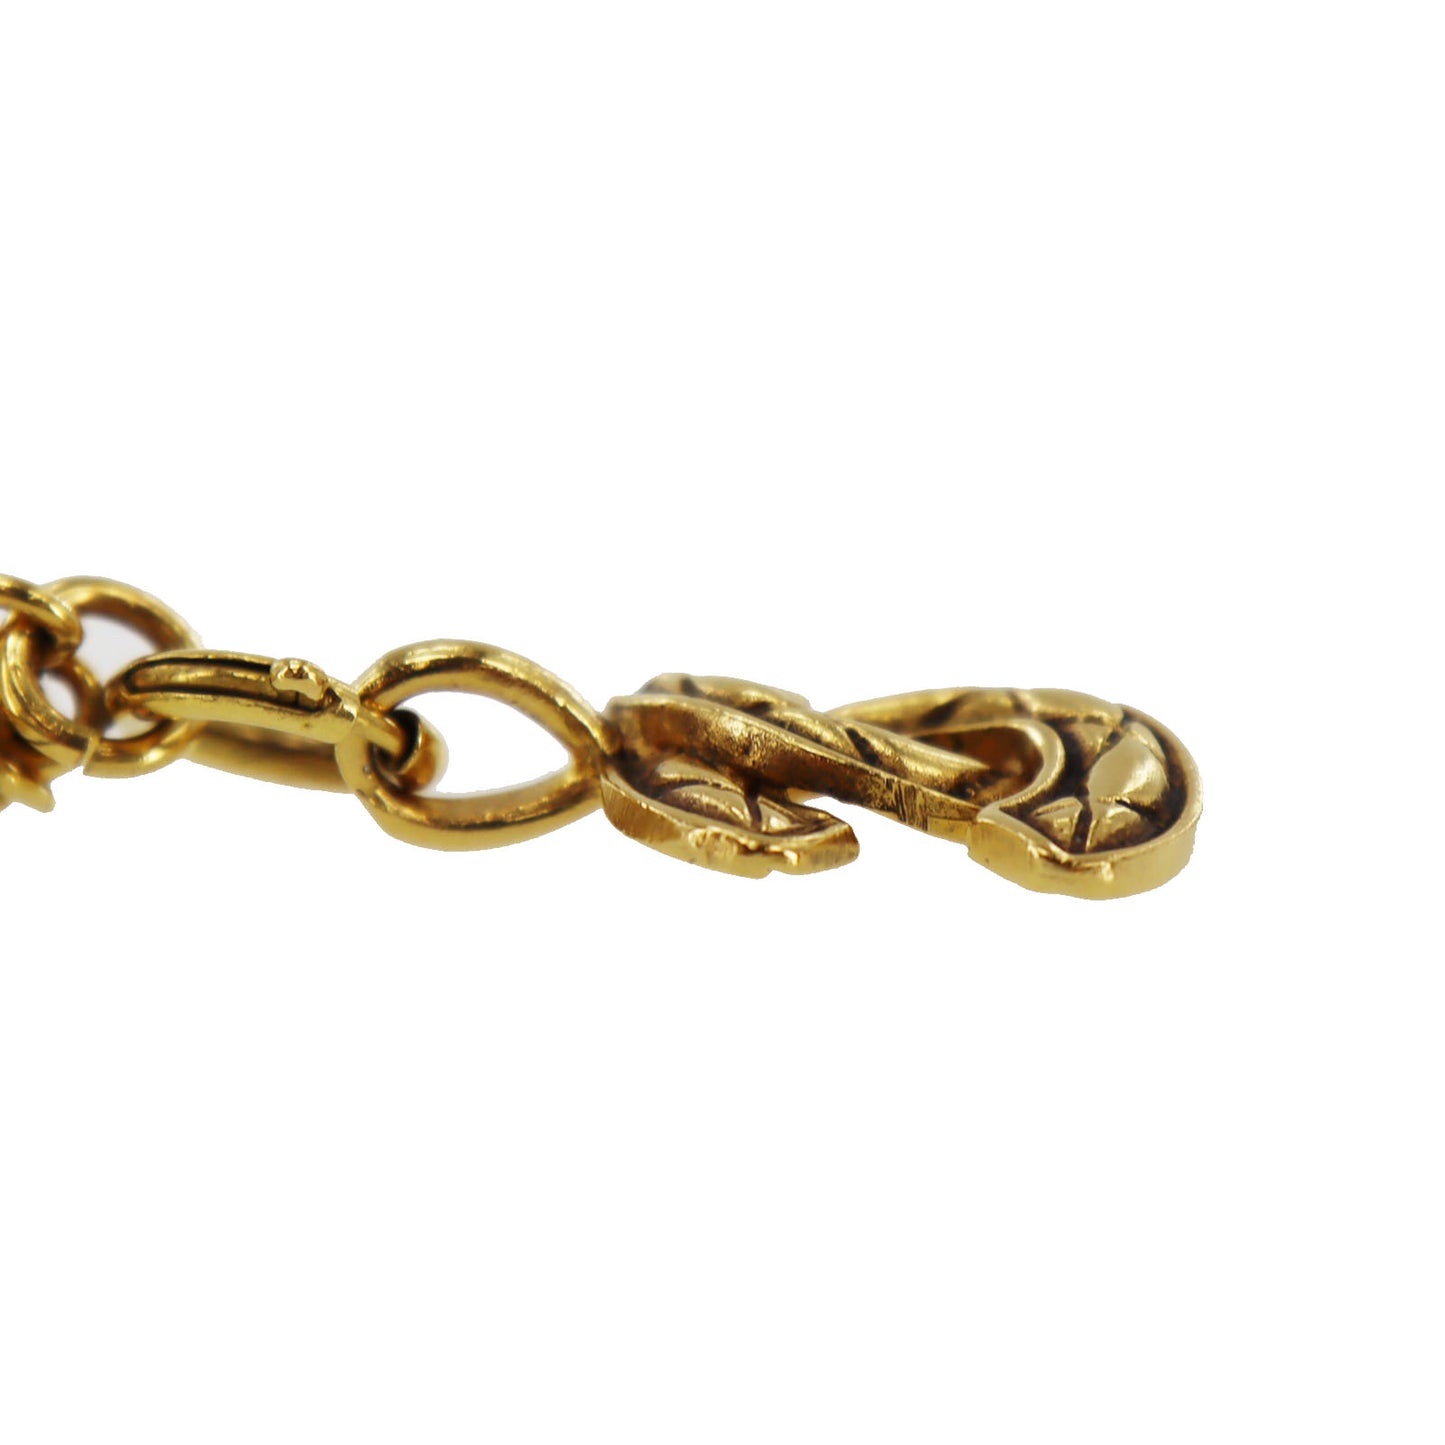 CHANEL CC Logos Gold Plated Chain Used Necklace Vintage #AH669